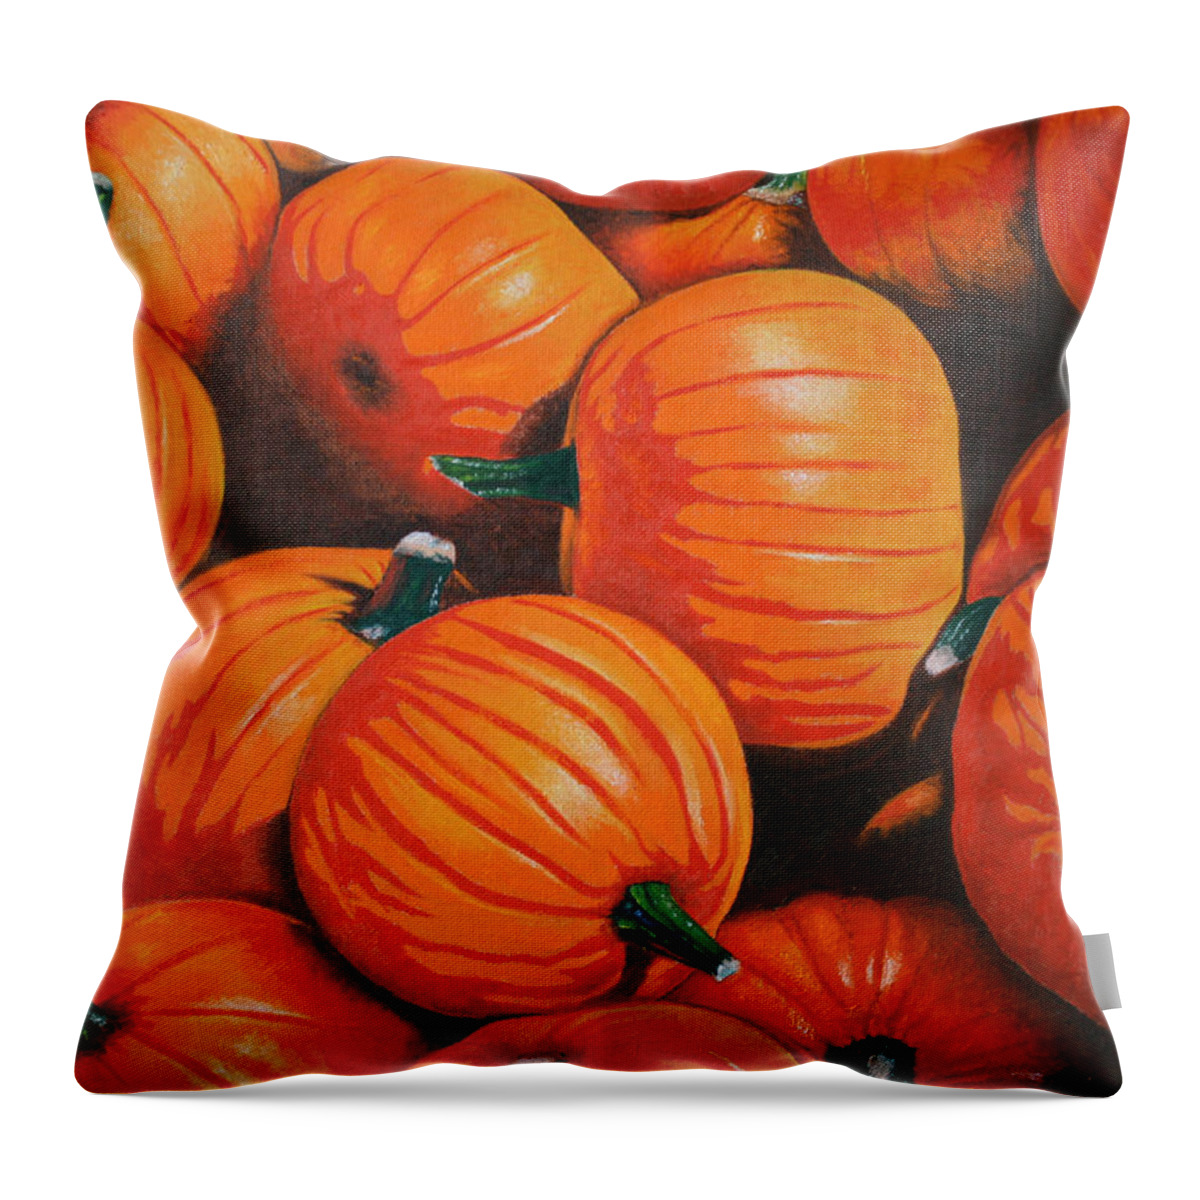 Pumpkins Throw Pillow featuring the painting The Harvest by Stephen J DiRienzo